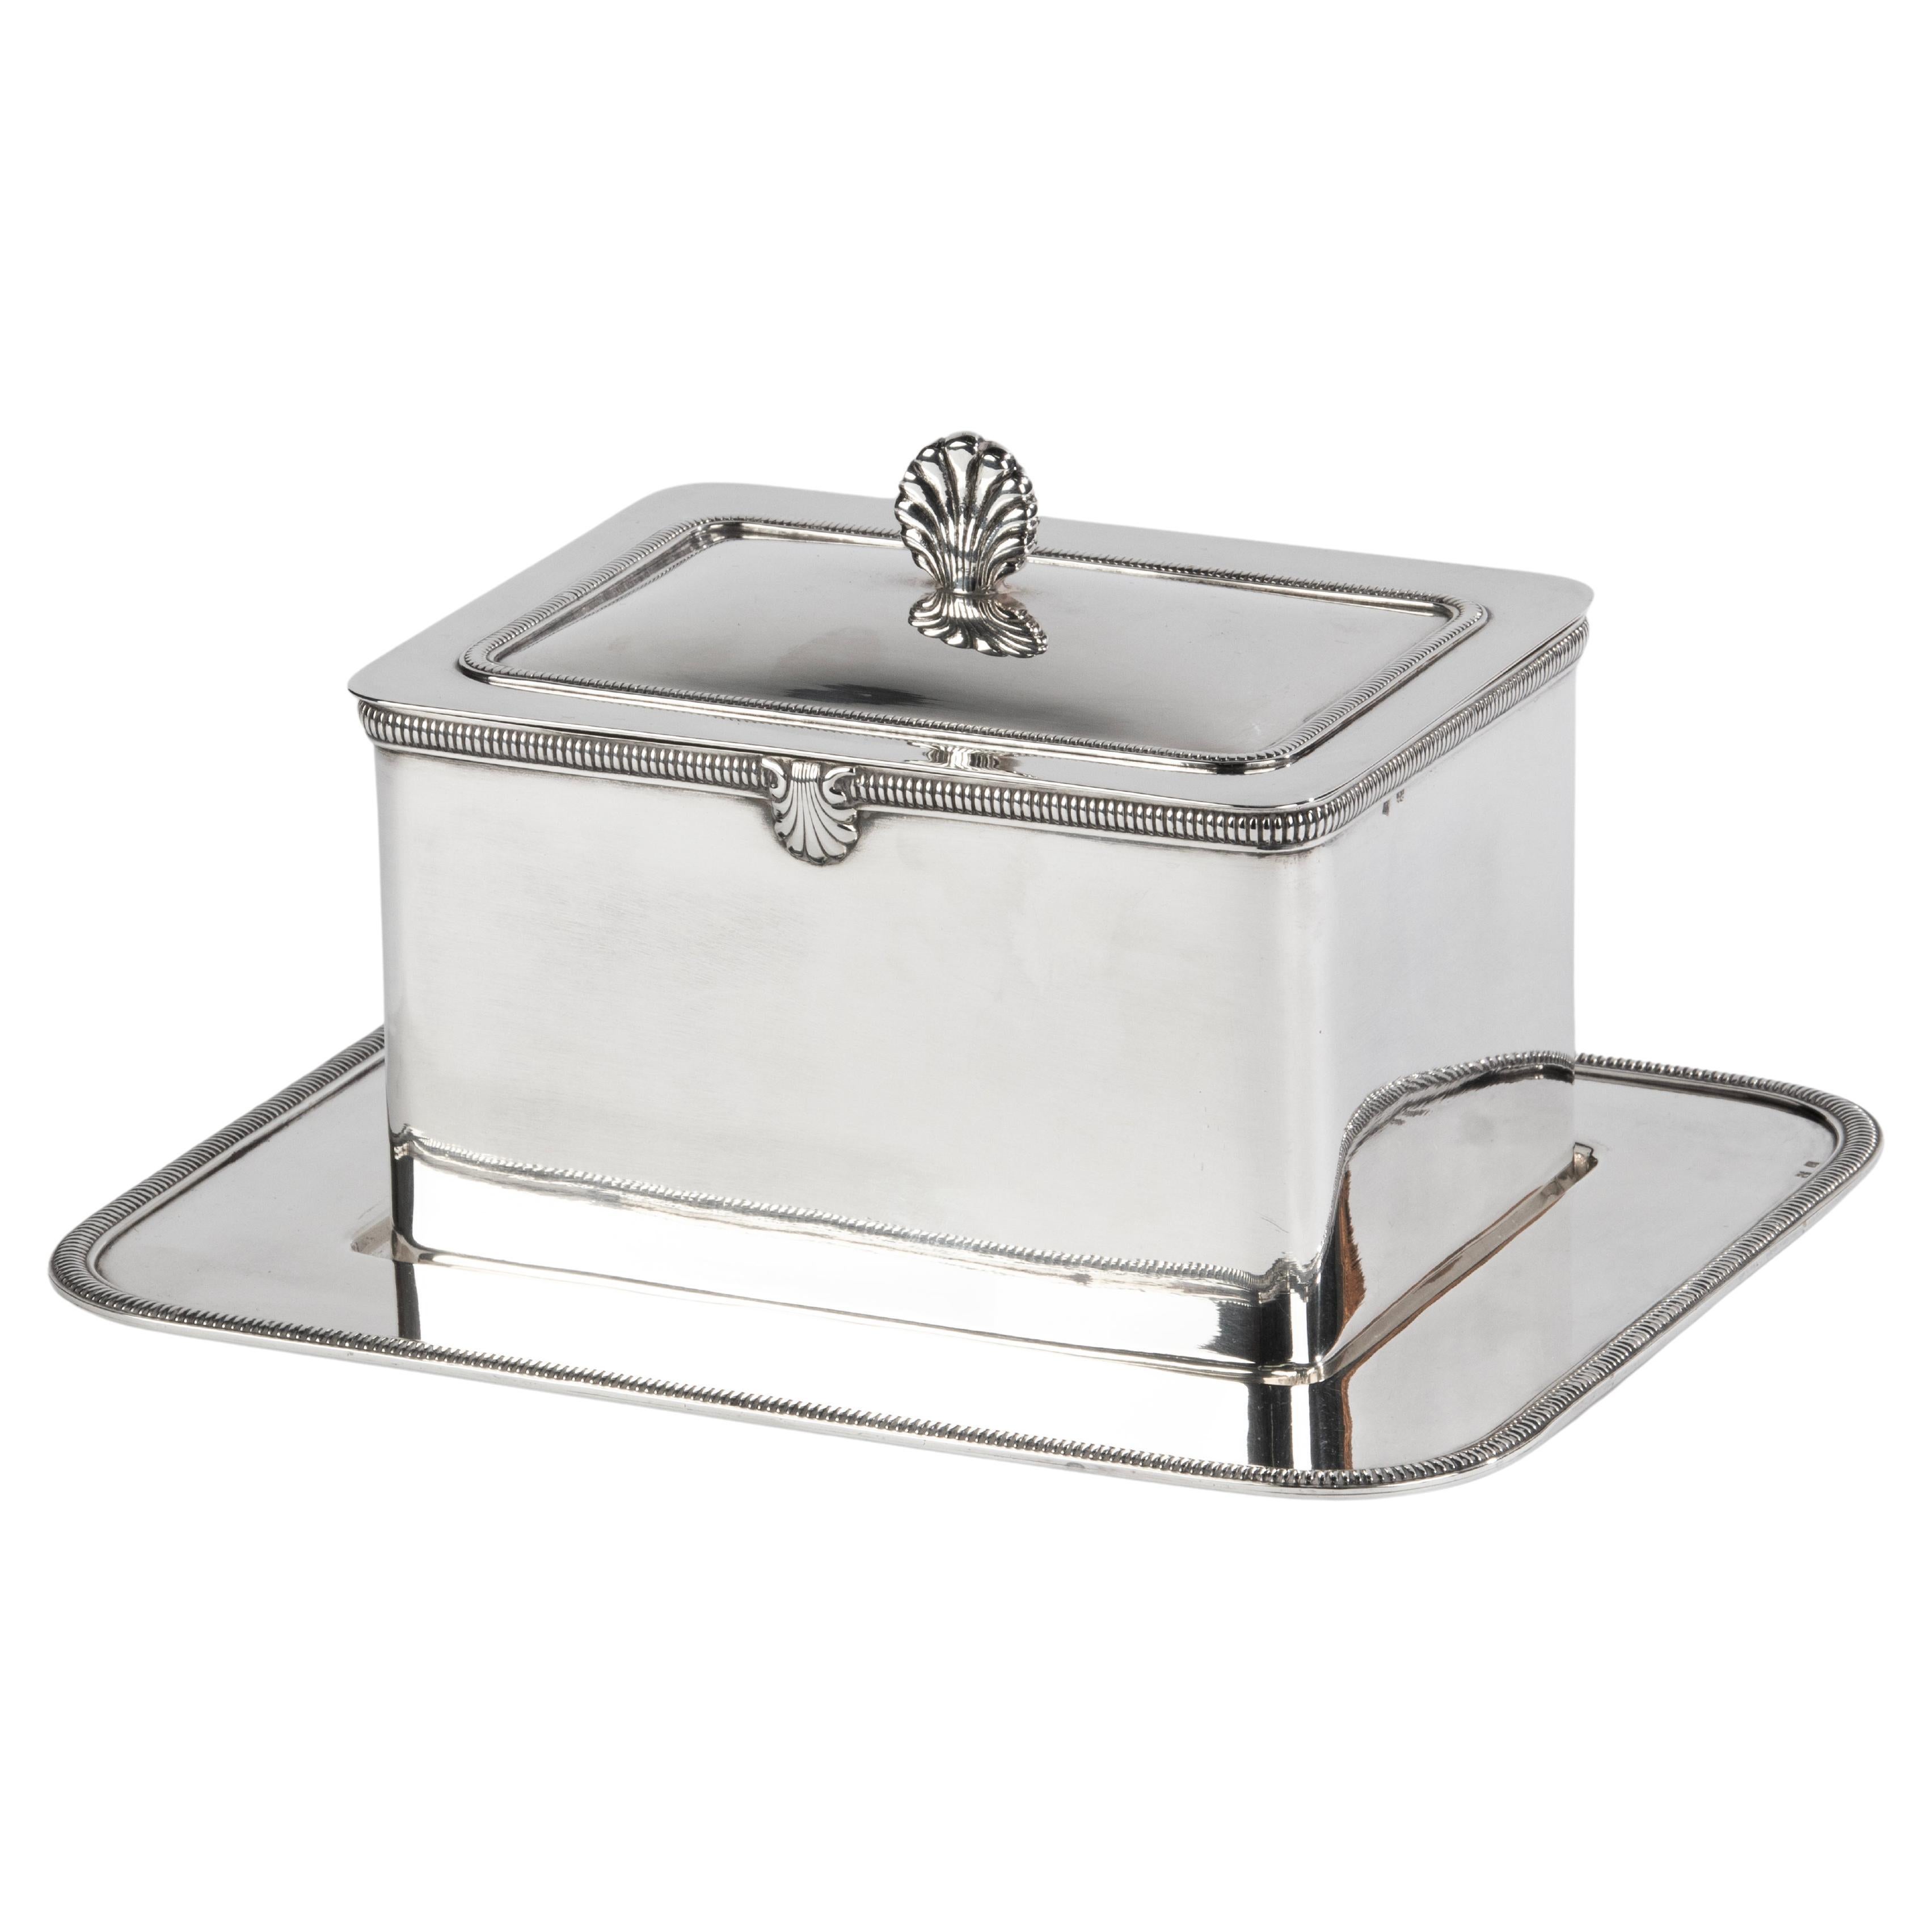 Elegant Mid 20th Century Silver Plated Biscuit Barrel on Tray  For Sale